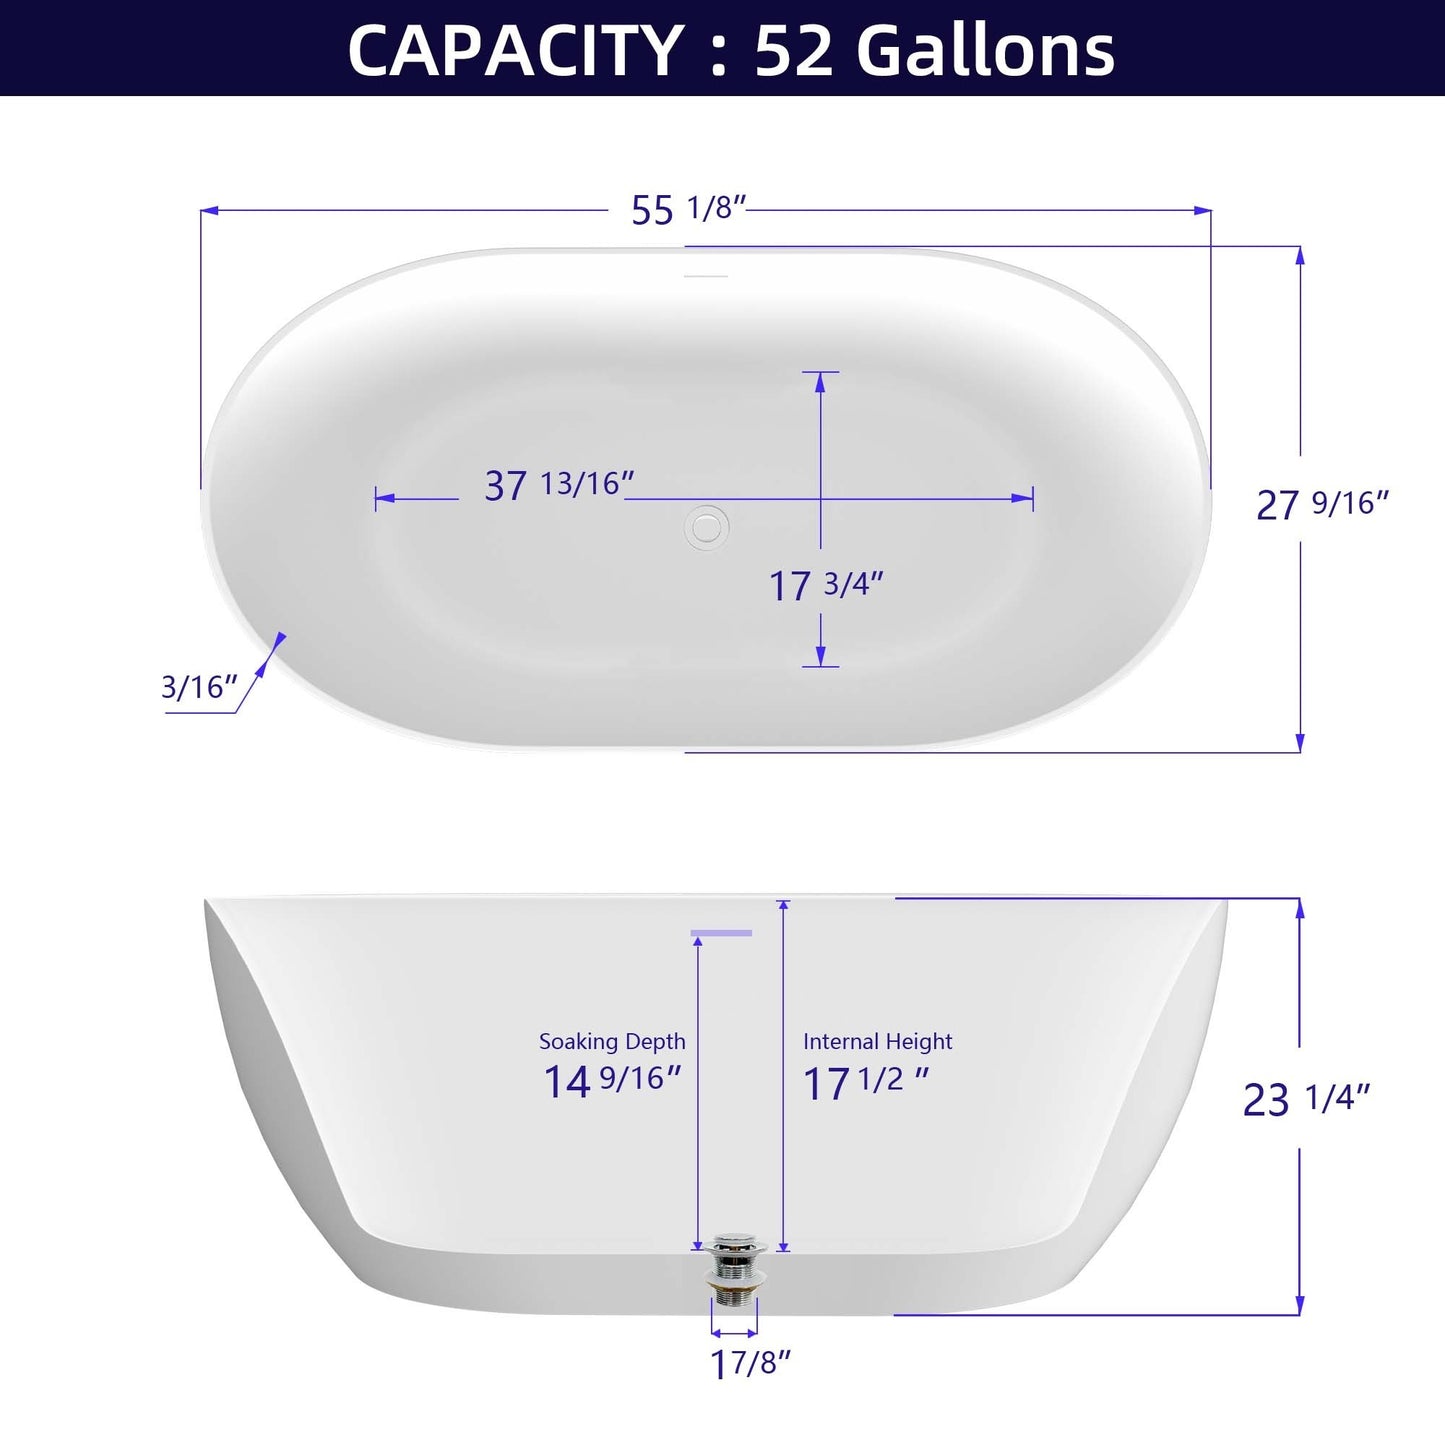 55" Acrylic Free Standing Tub - Classic Oval Shape Soaking Tub, Adjustable Freestanding Bathtub with Integrated Slotted Overflow and Chrome Pop-up Drain Anti-clogging Gloss White